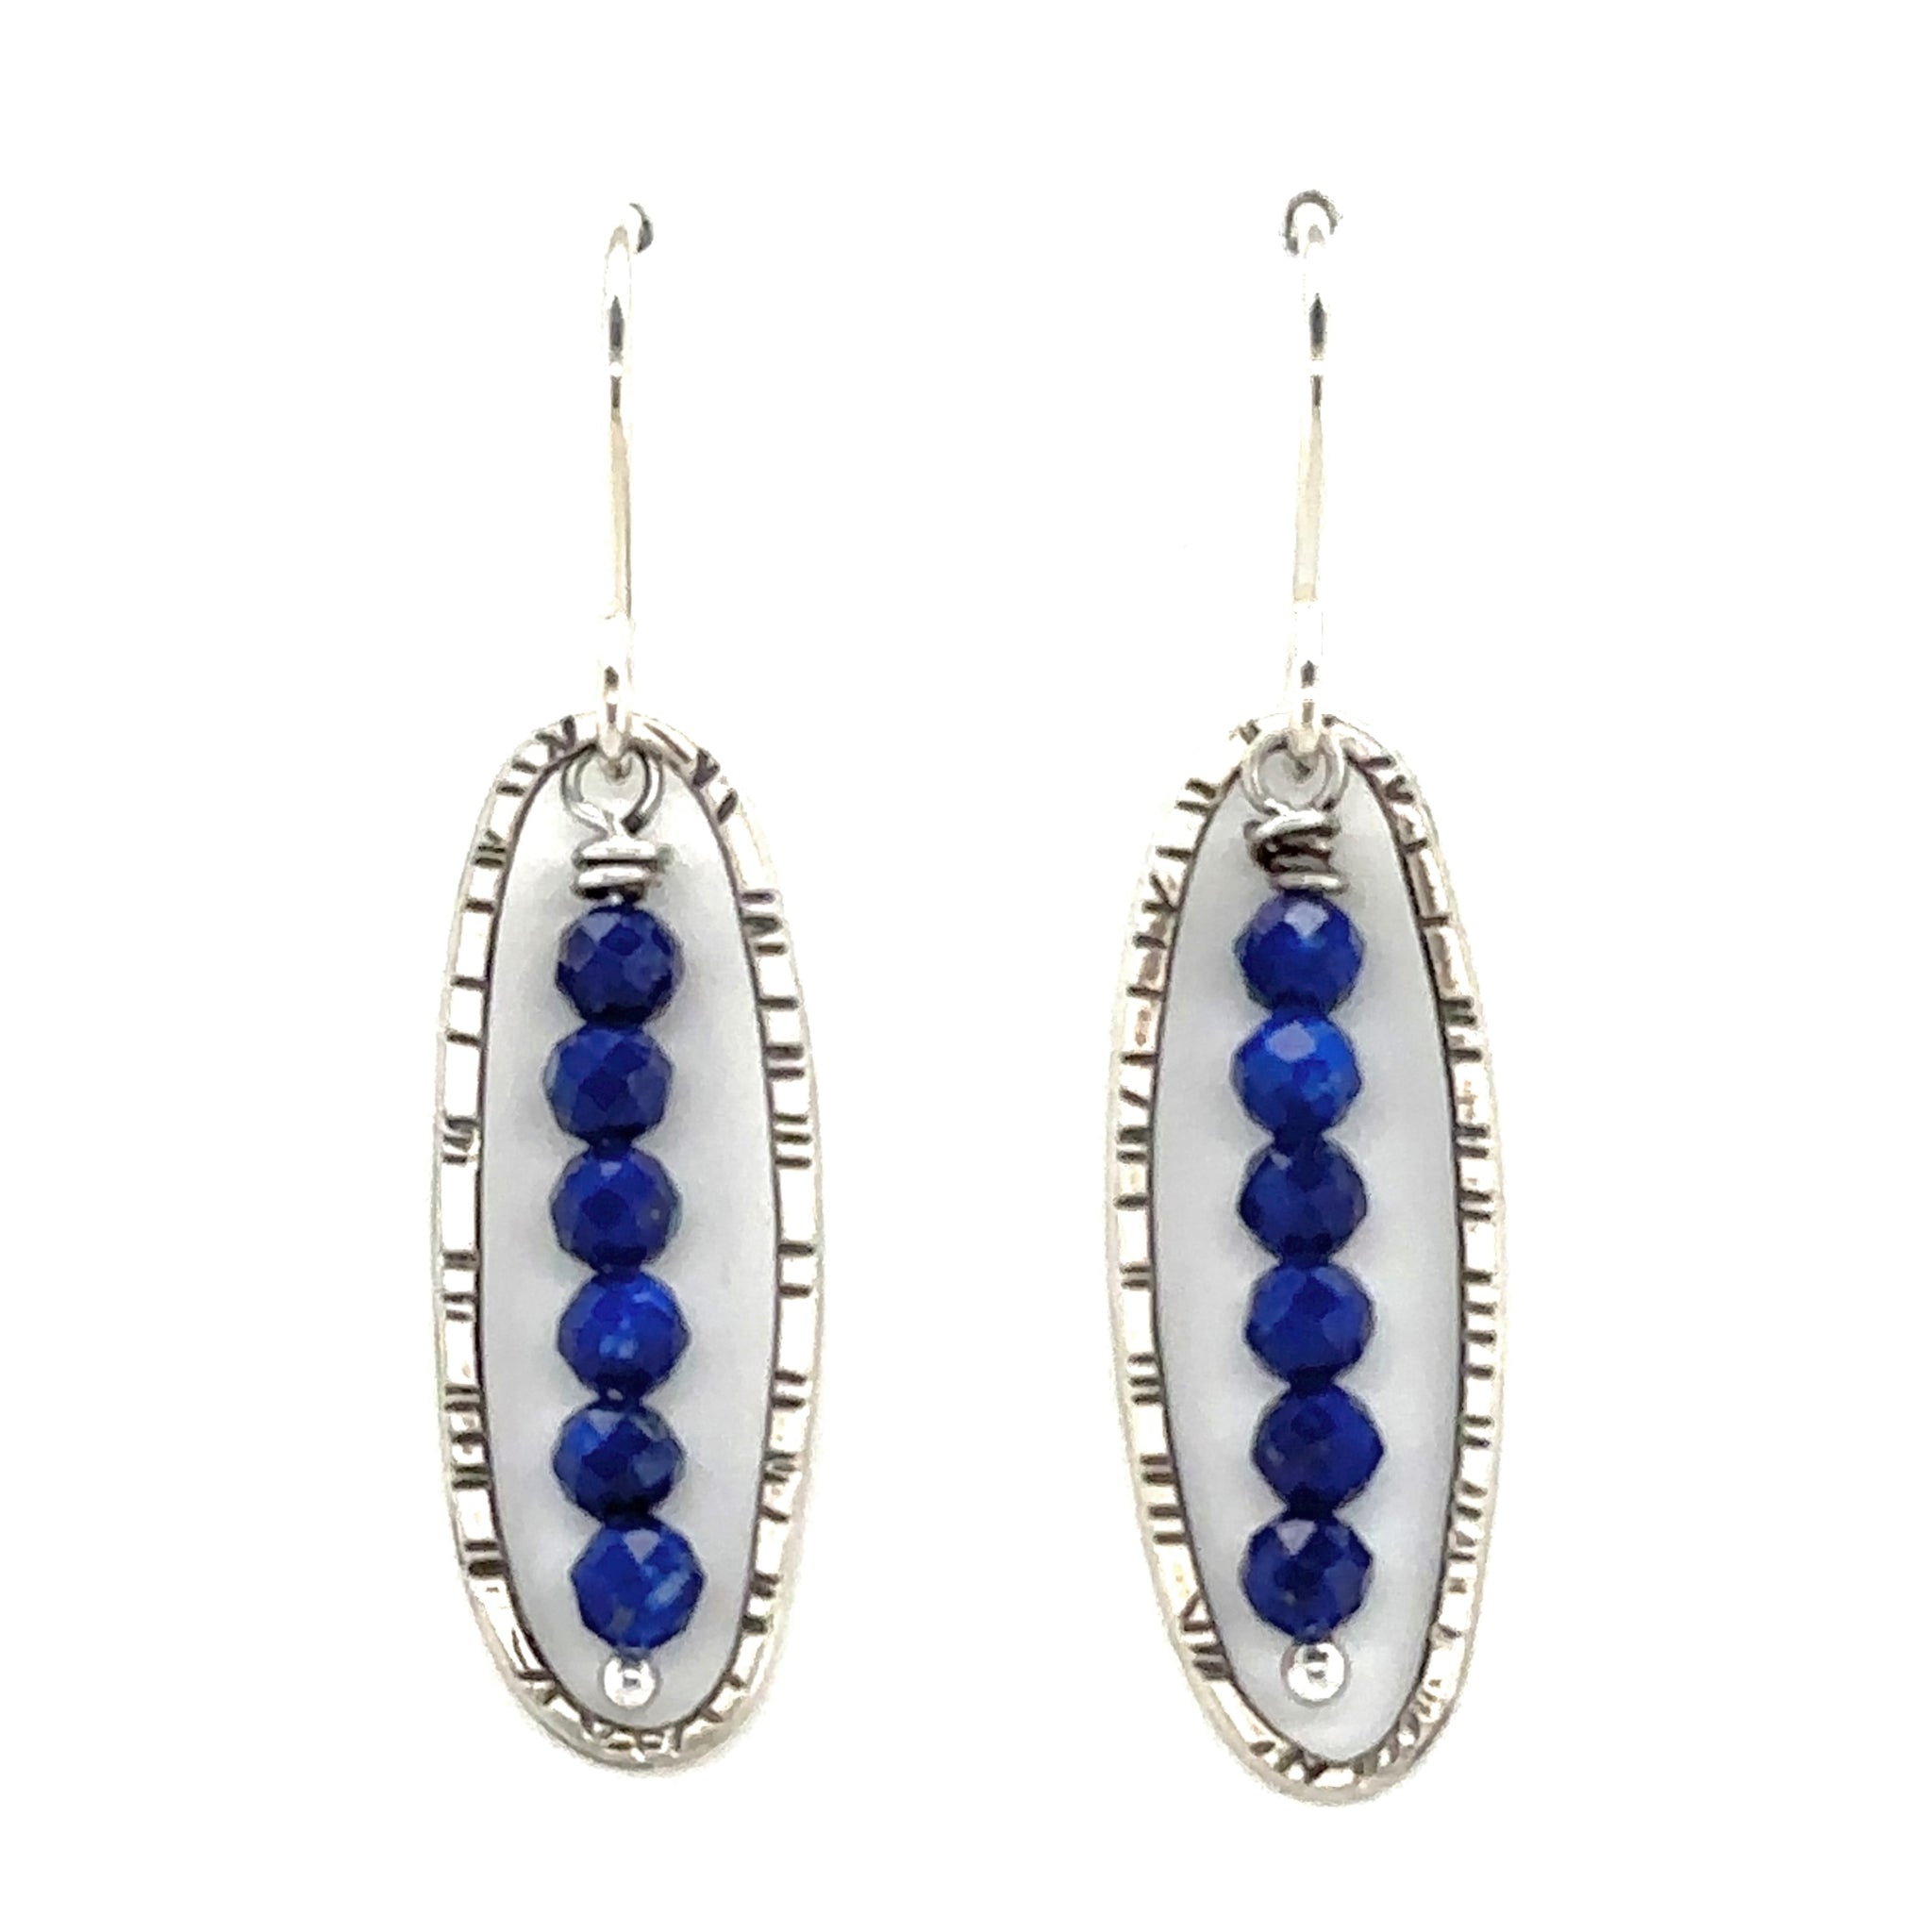 Stamped Oval Earrings with Lapis Beads